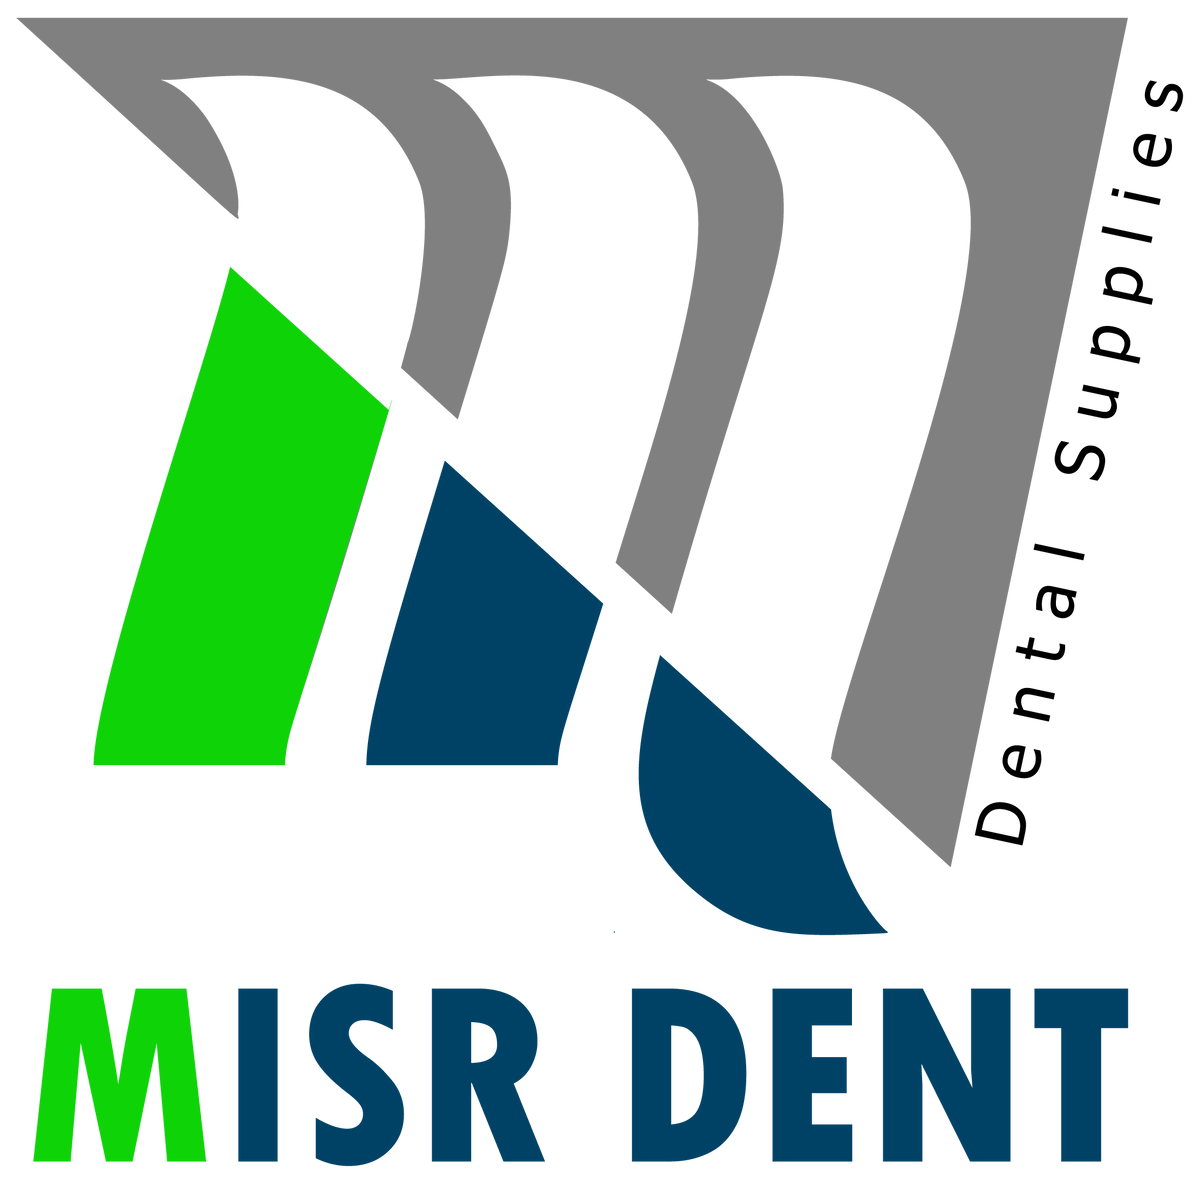 MisrDent for dental supplies